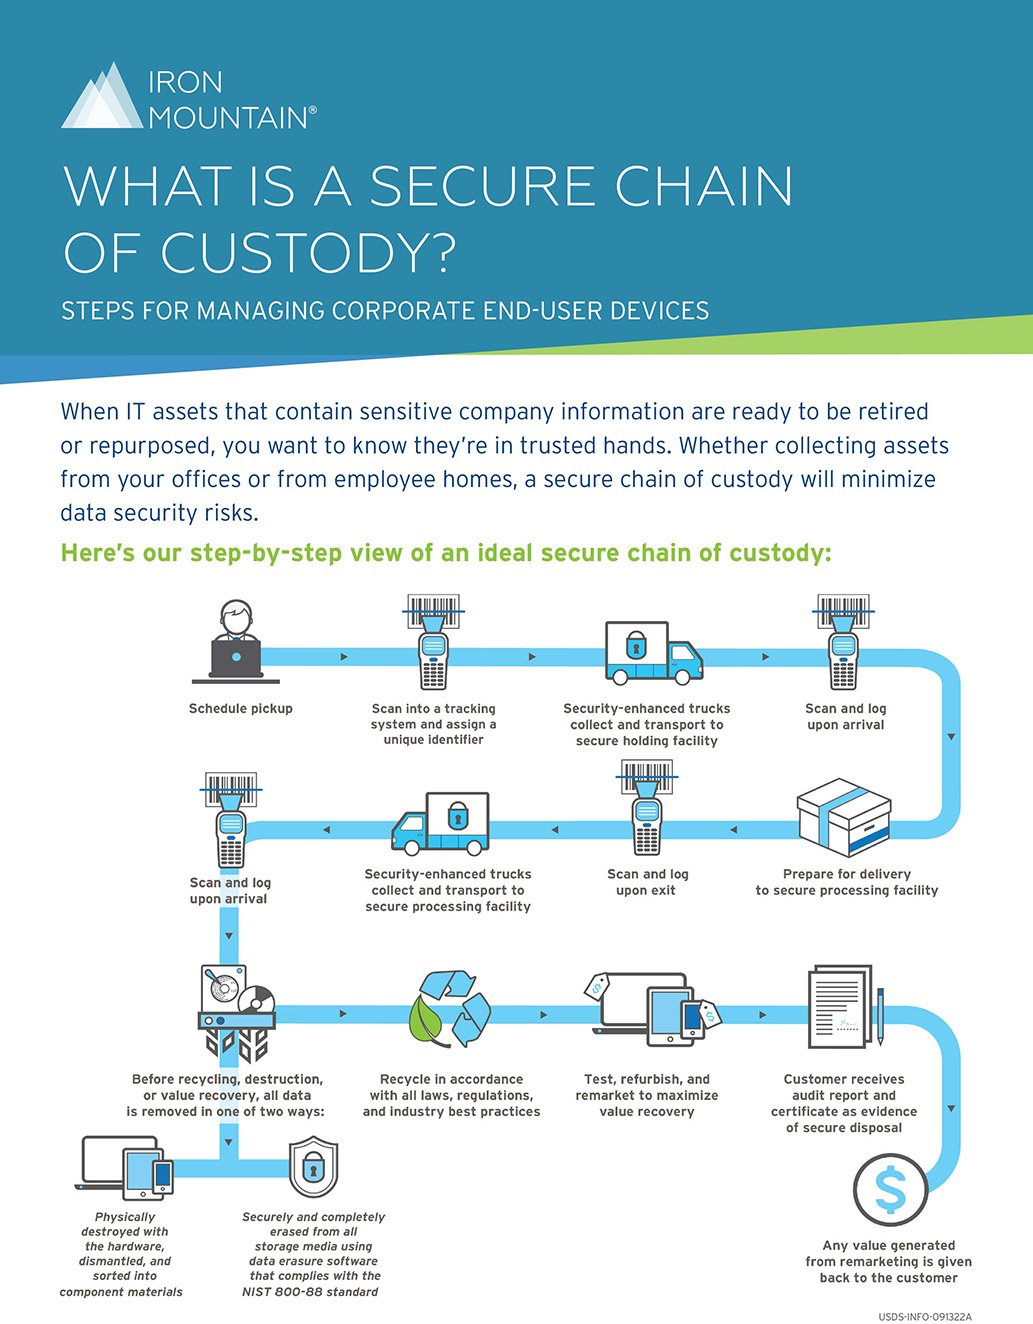 What is a secure chain of custody